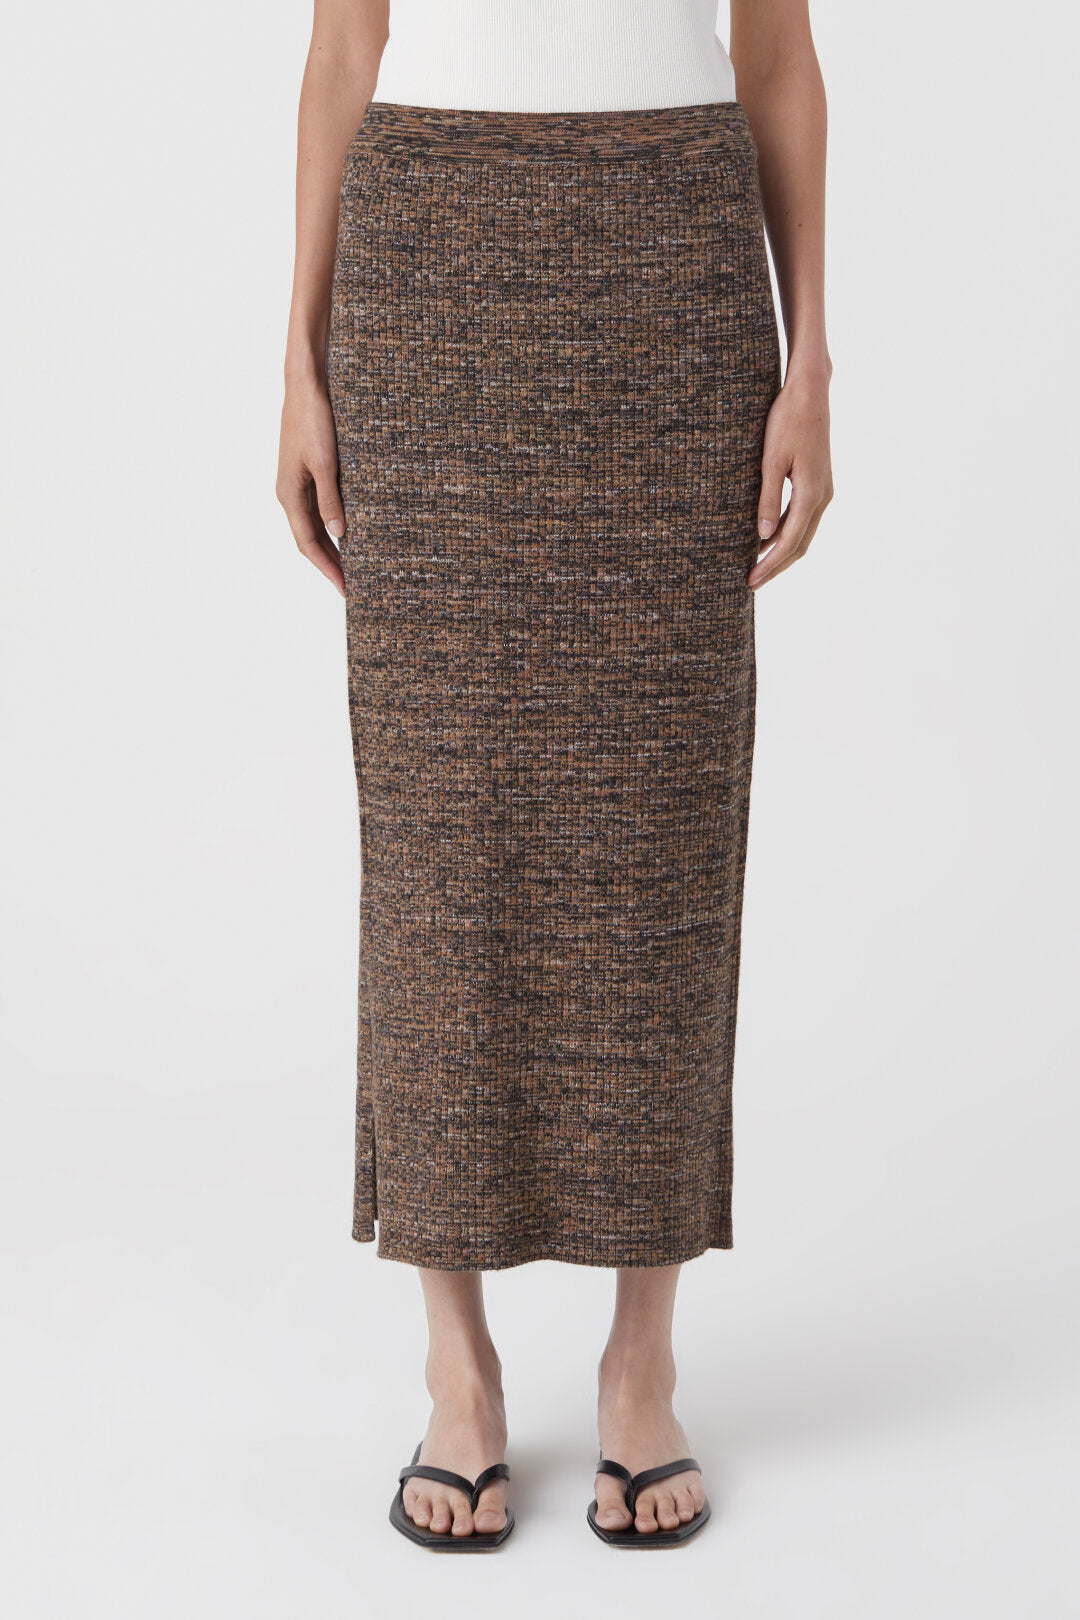 KNITTED PENCIL SKIRT - HEATHER